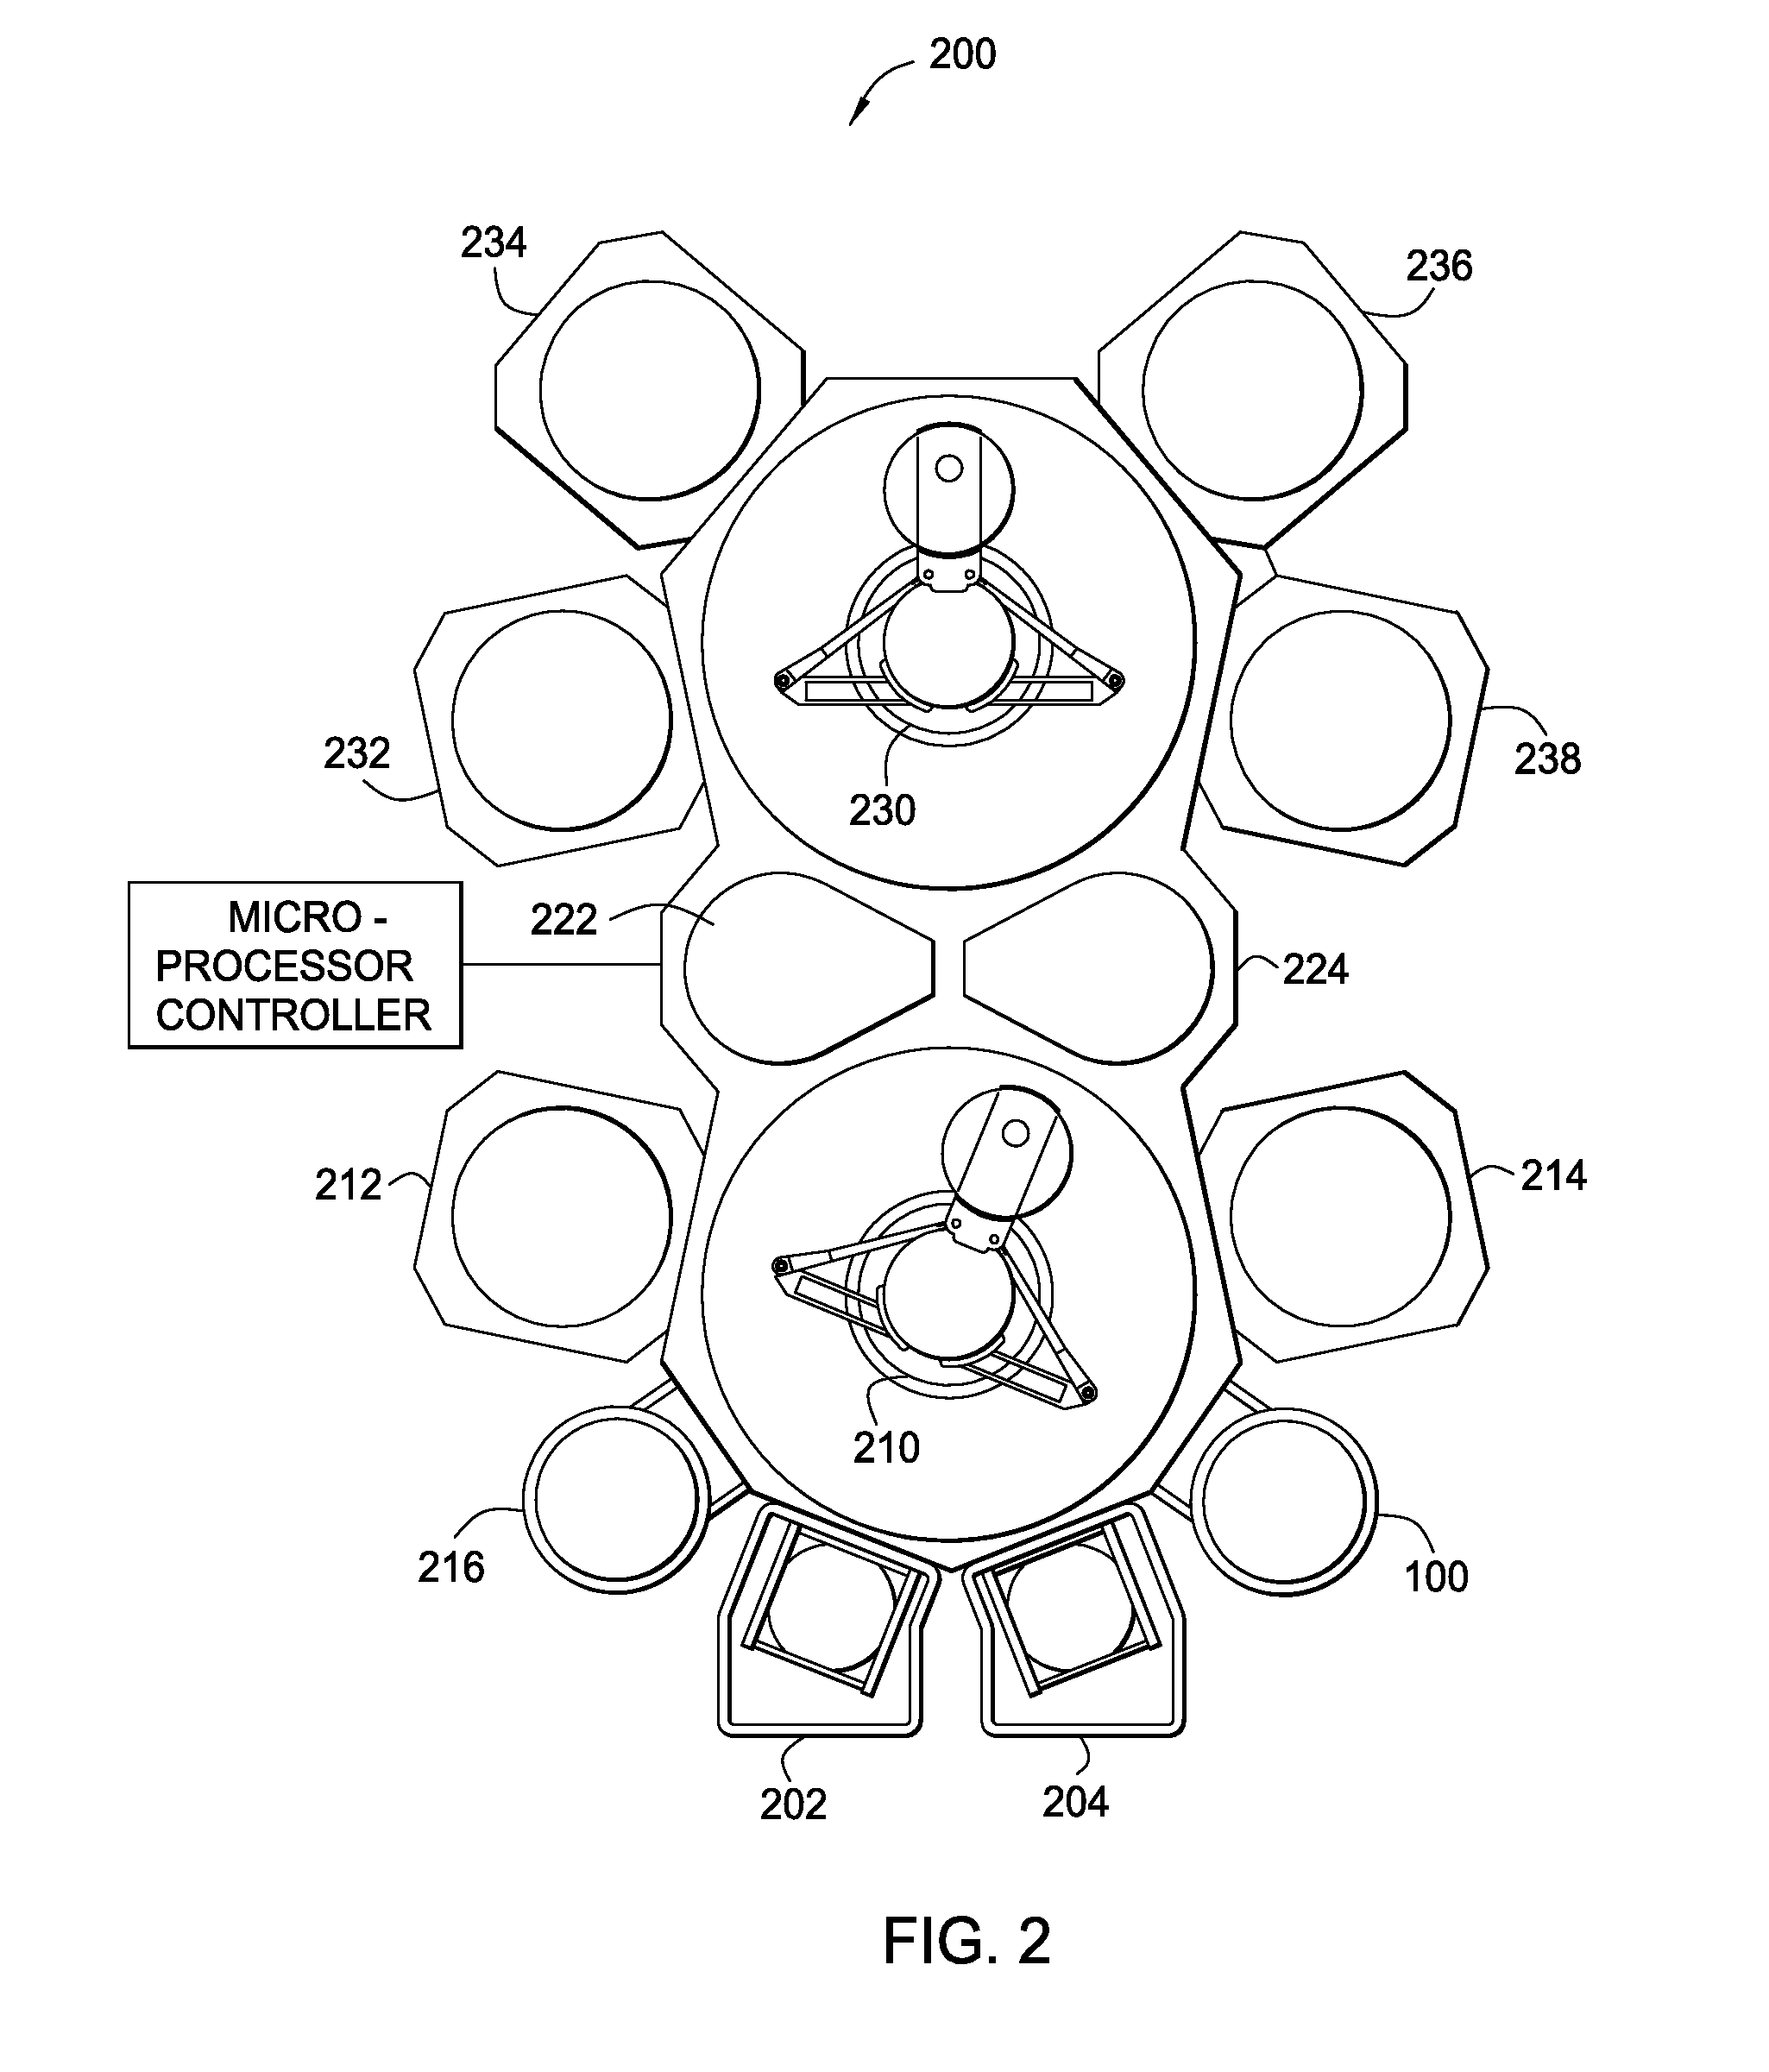 Method for stabilizing an interface post etch to minimize queue time issues before next processing step